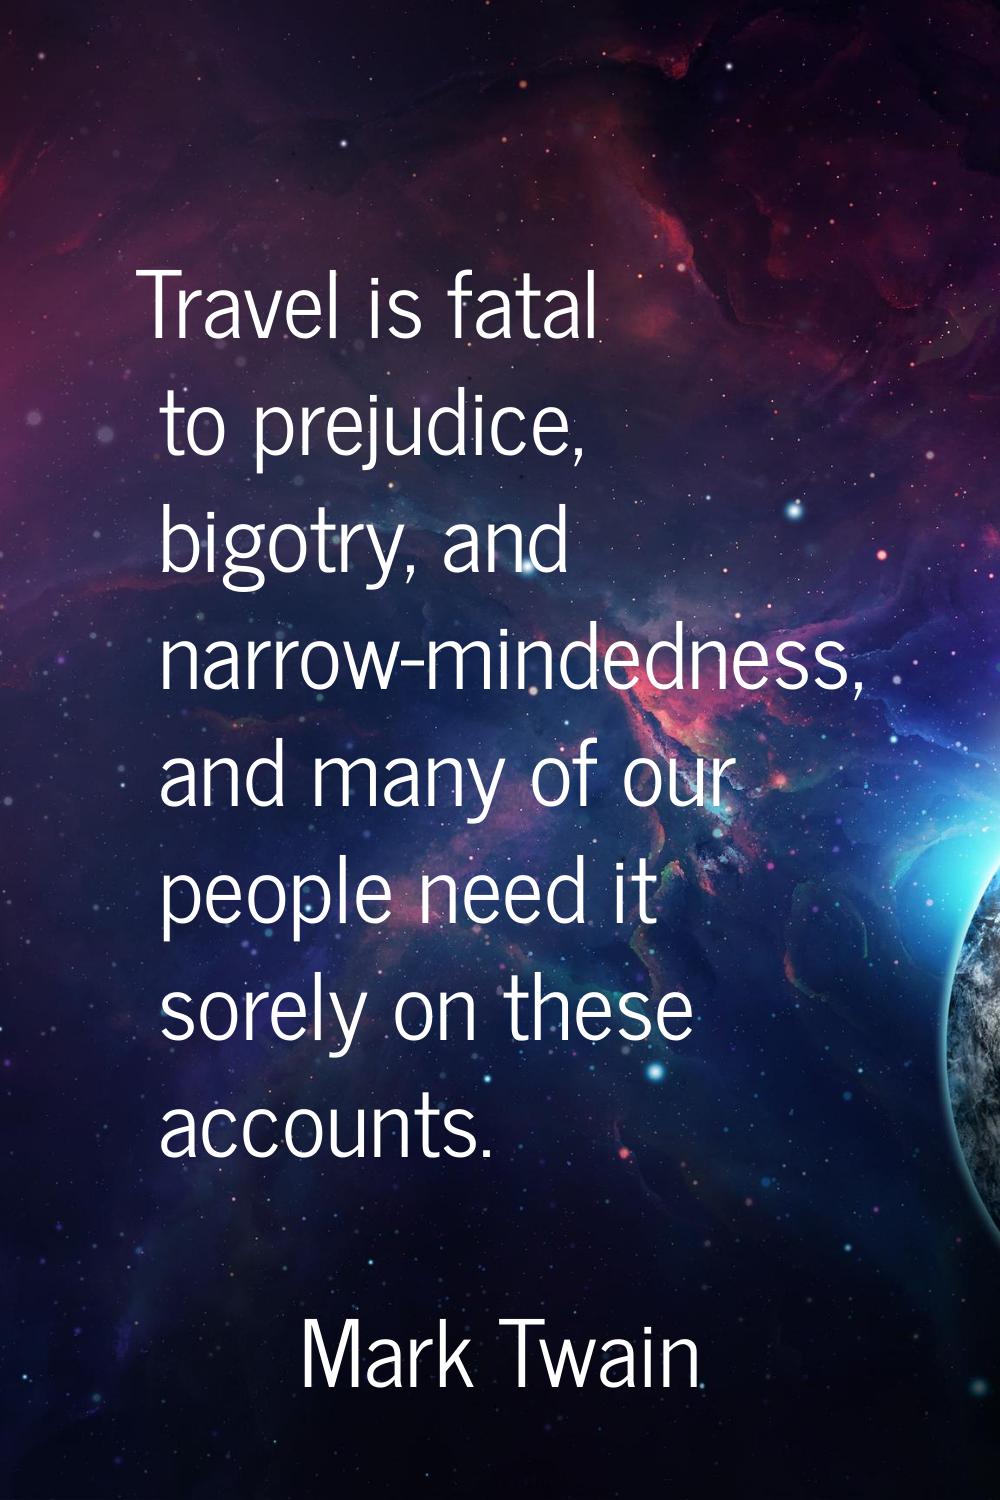 Travel is fatal to prejudice, bigotry, and narrow-mindedness, and many of our people need it sorely